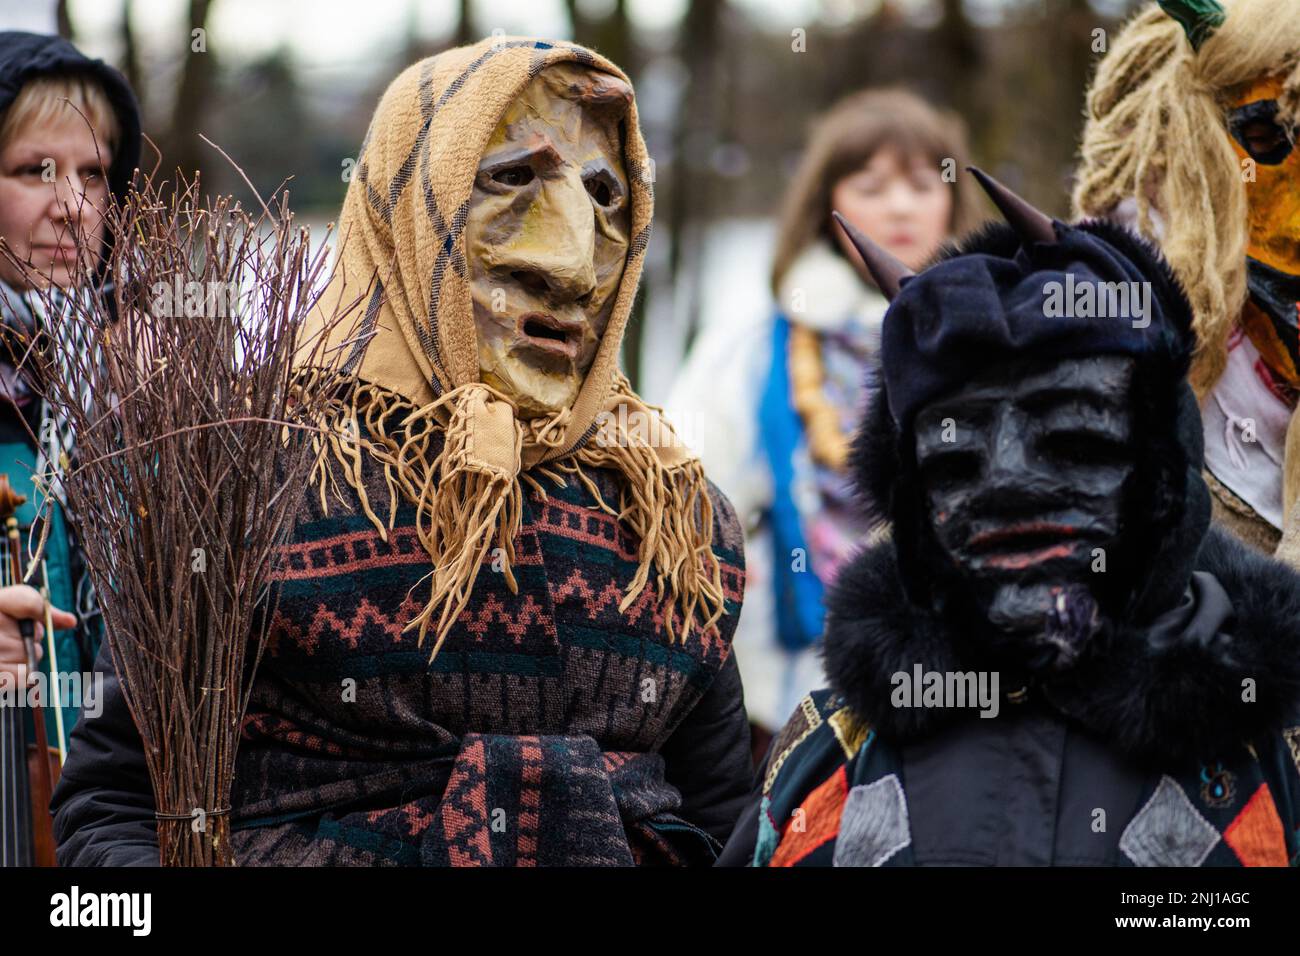 Traditional masks and costumes in Lithuania during Uzgavenes, a Lithuanian folk festival during Carnival, seventh week before Easter Stock Photo